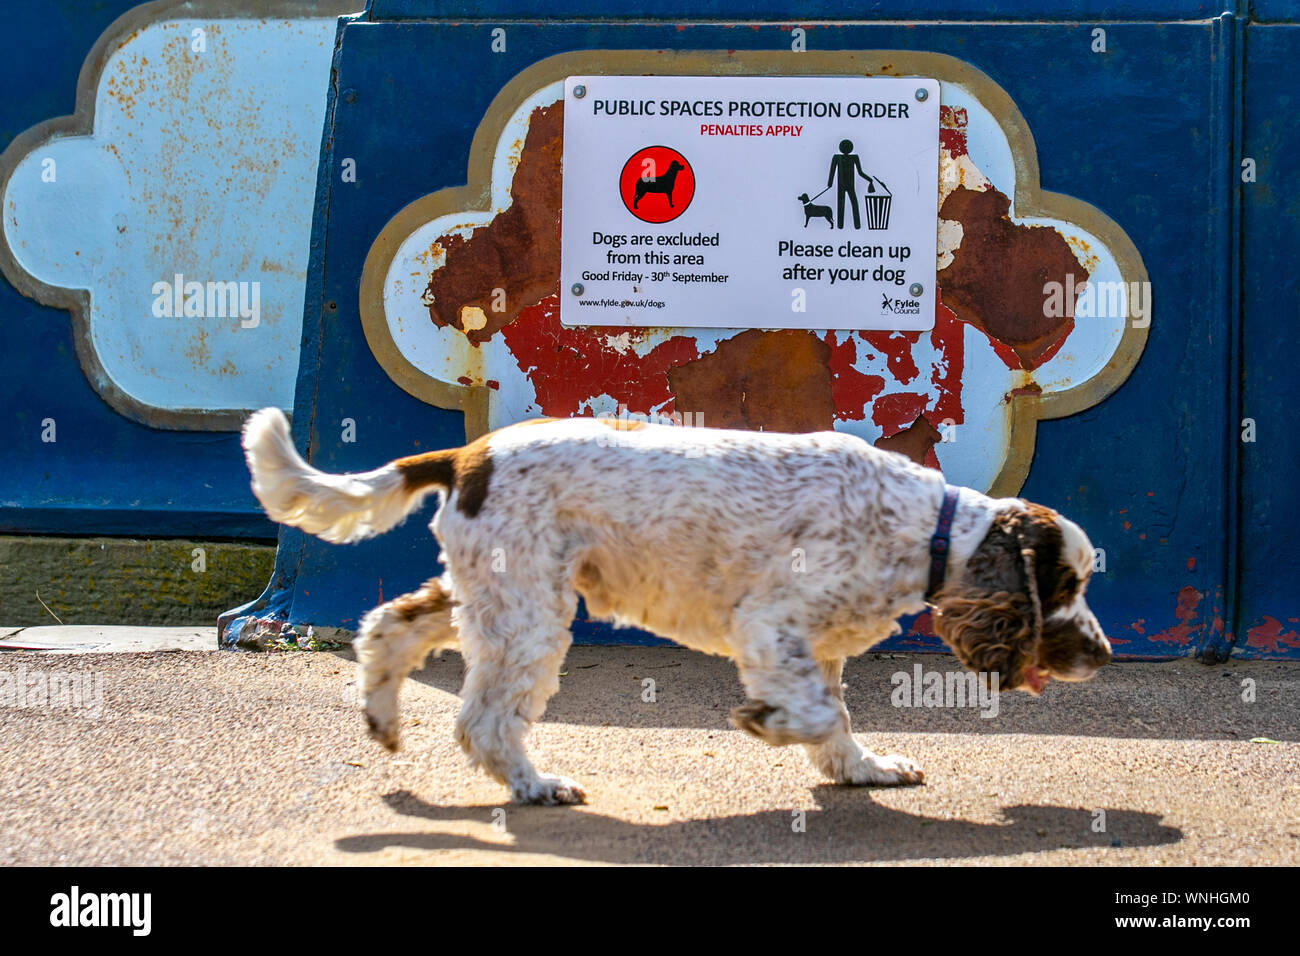 Spaniel Dog passing Public Space Protection Order, Penalties Apply; Seasonal restrictions on dogs using the beach at Lytham St Annes, UK Stock Photo